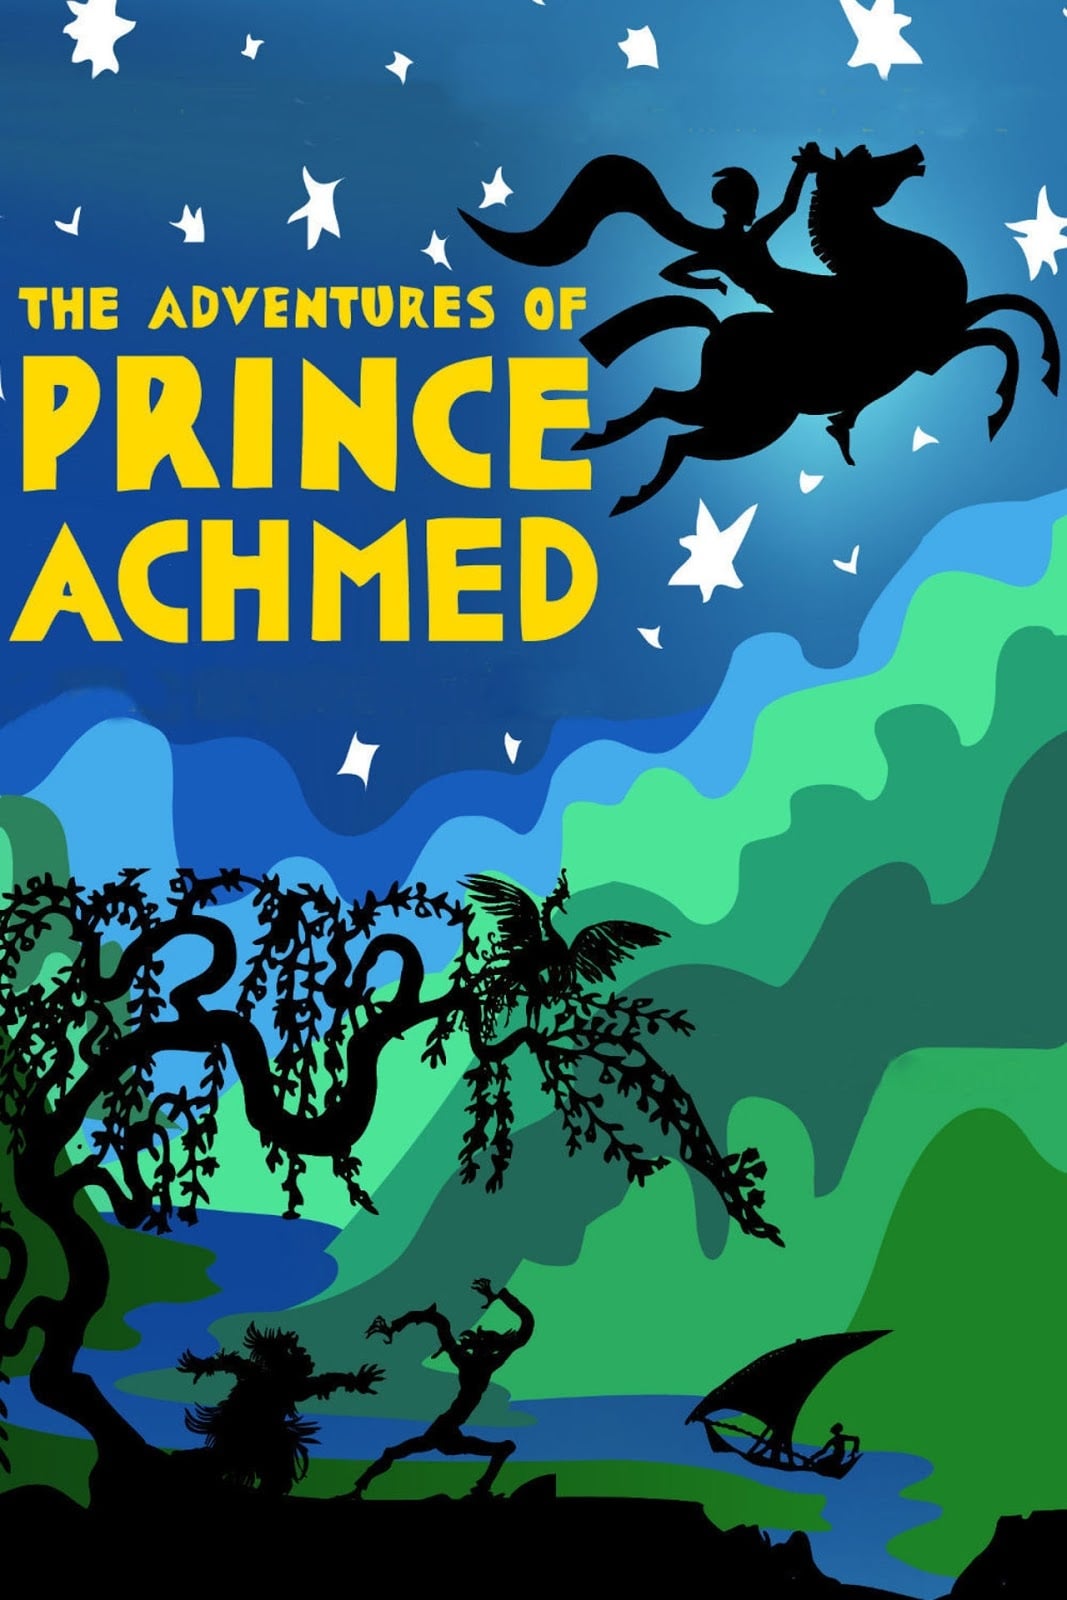 Poster for the movie "The Adventures of Prince Achmed"